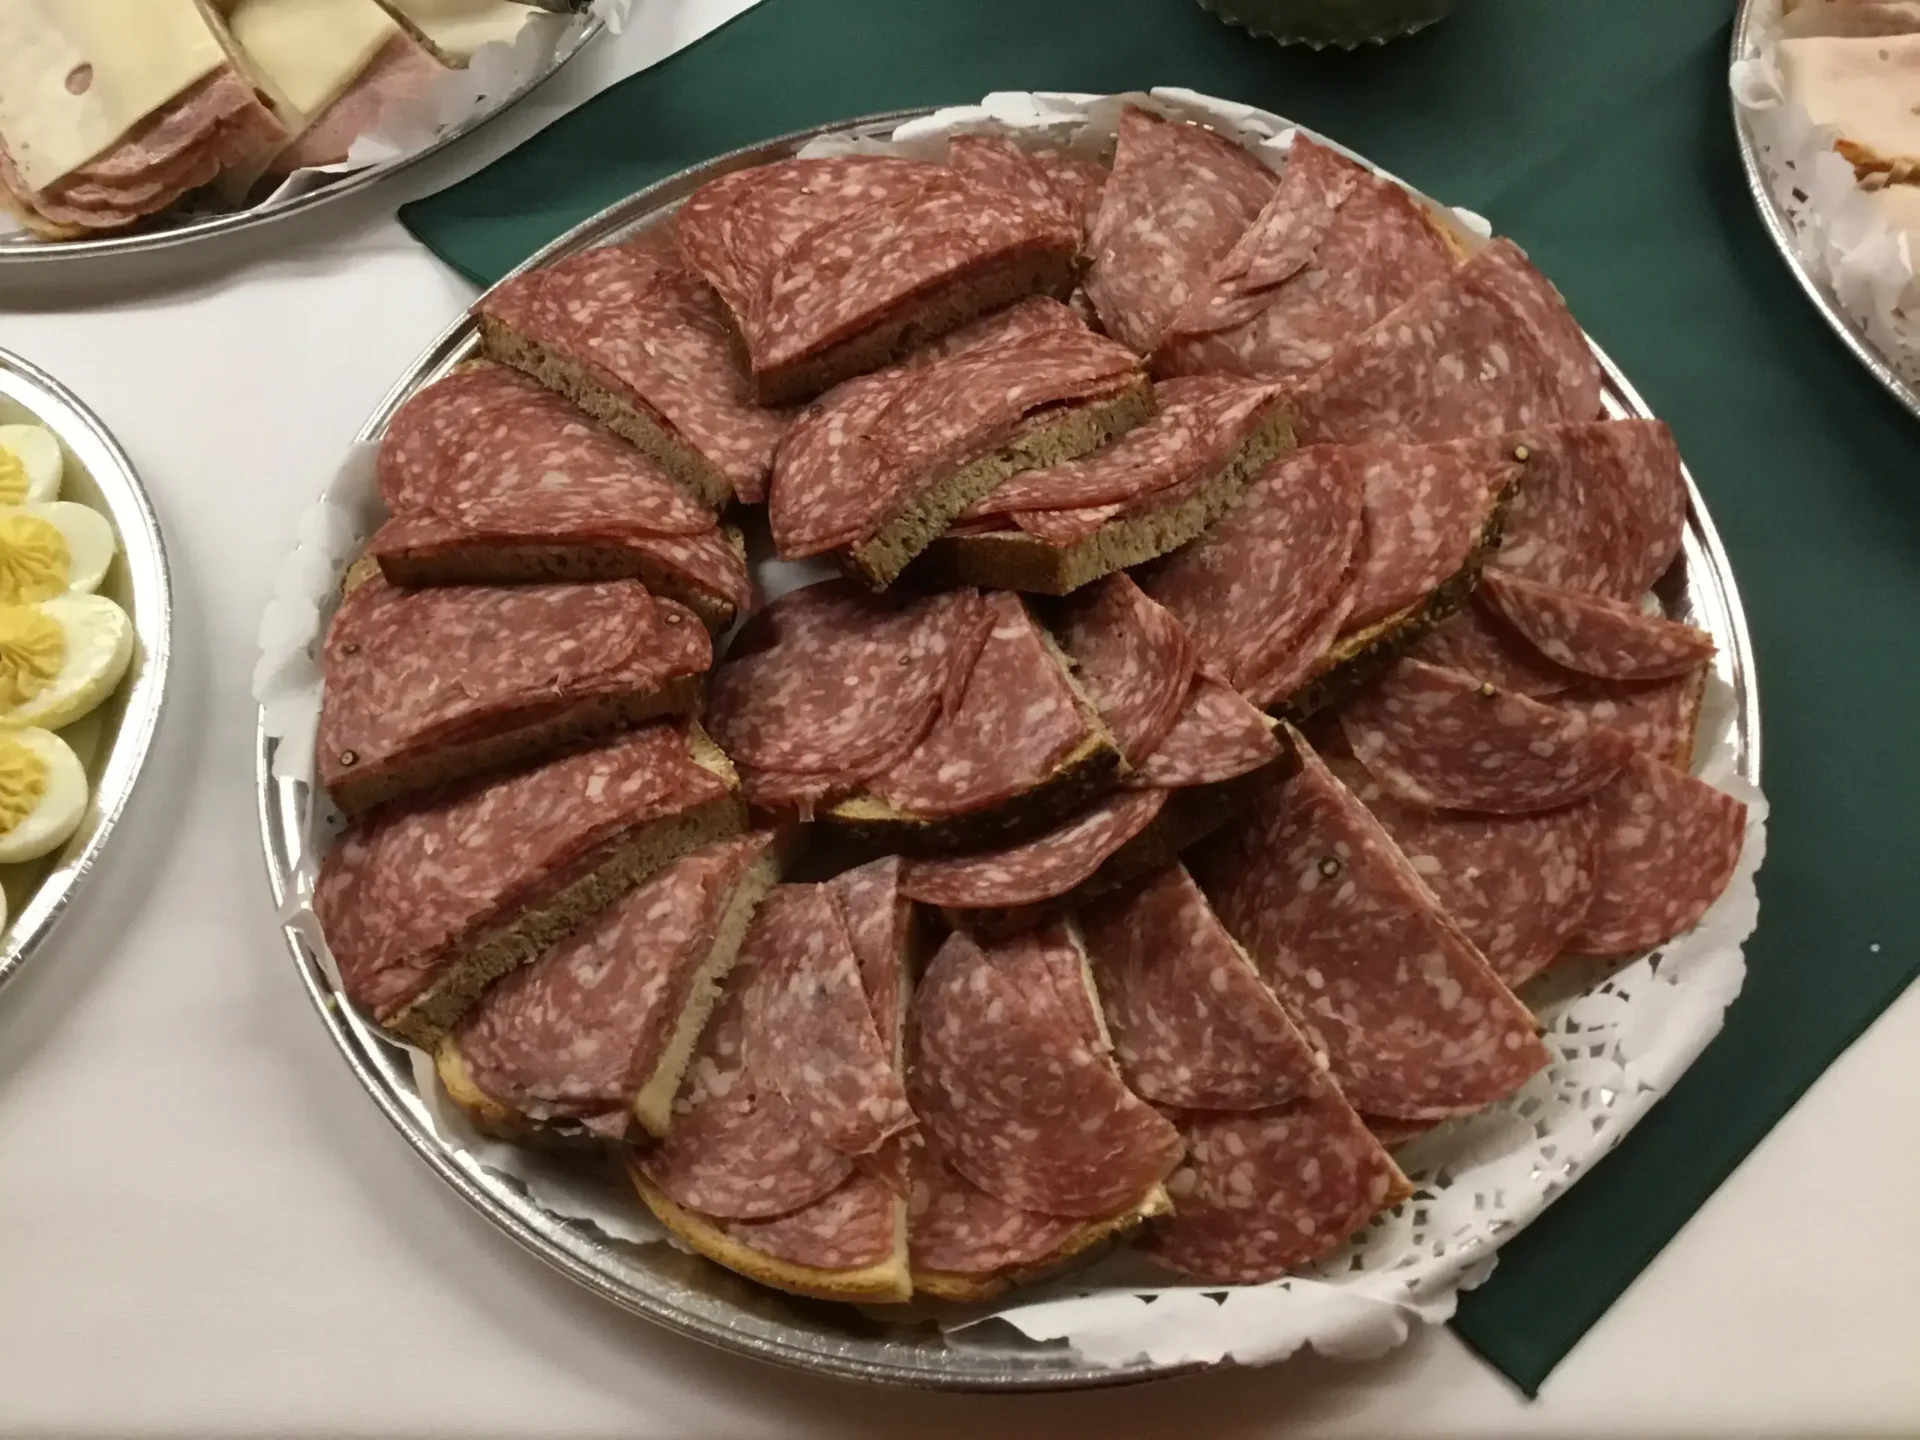 A plate of meat on top of the table.